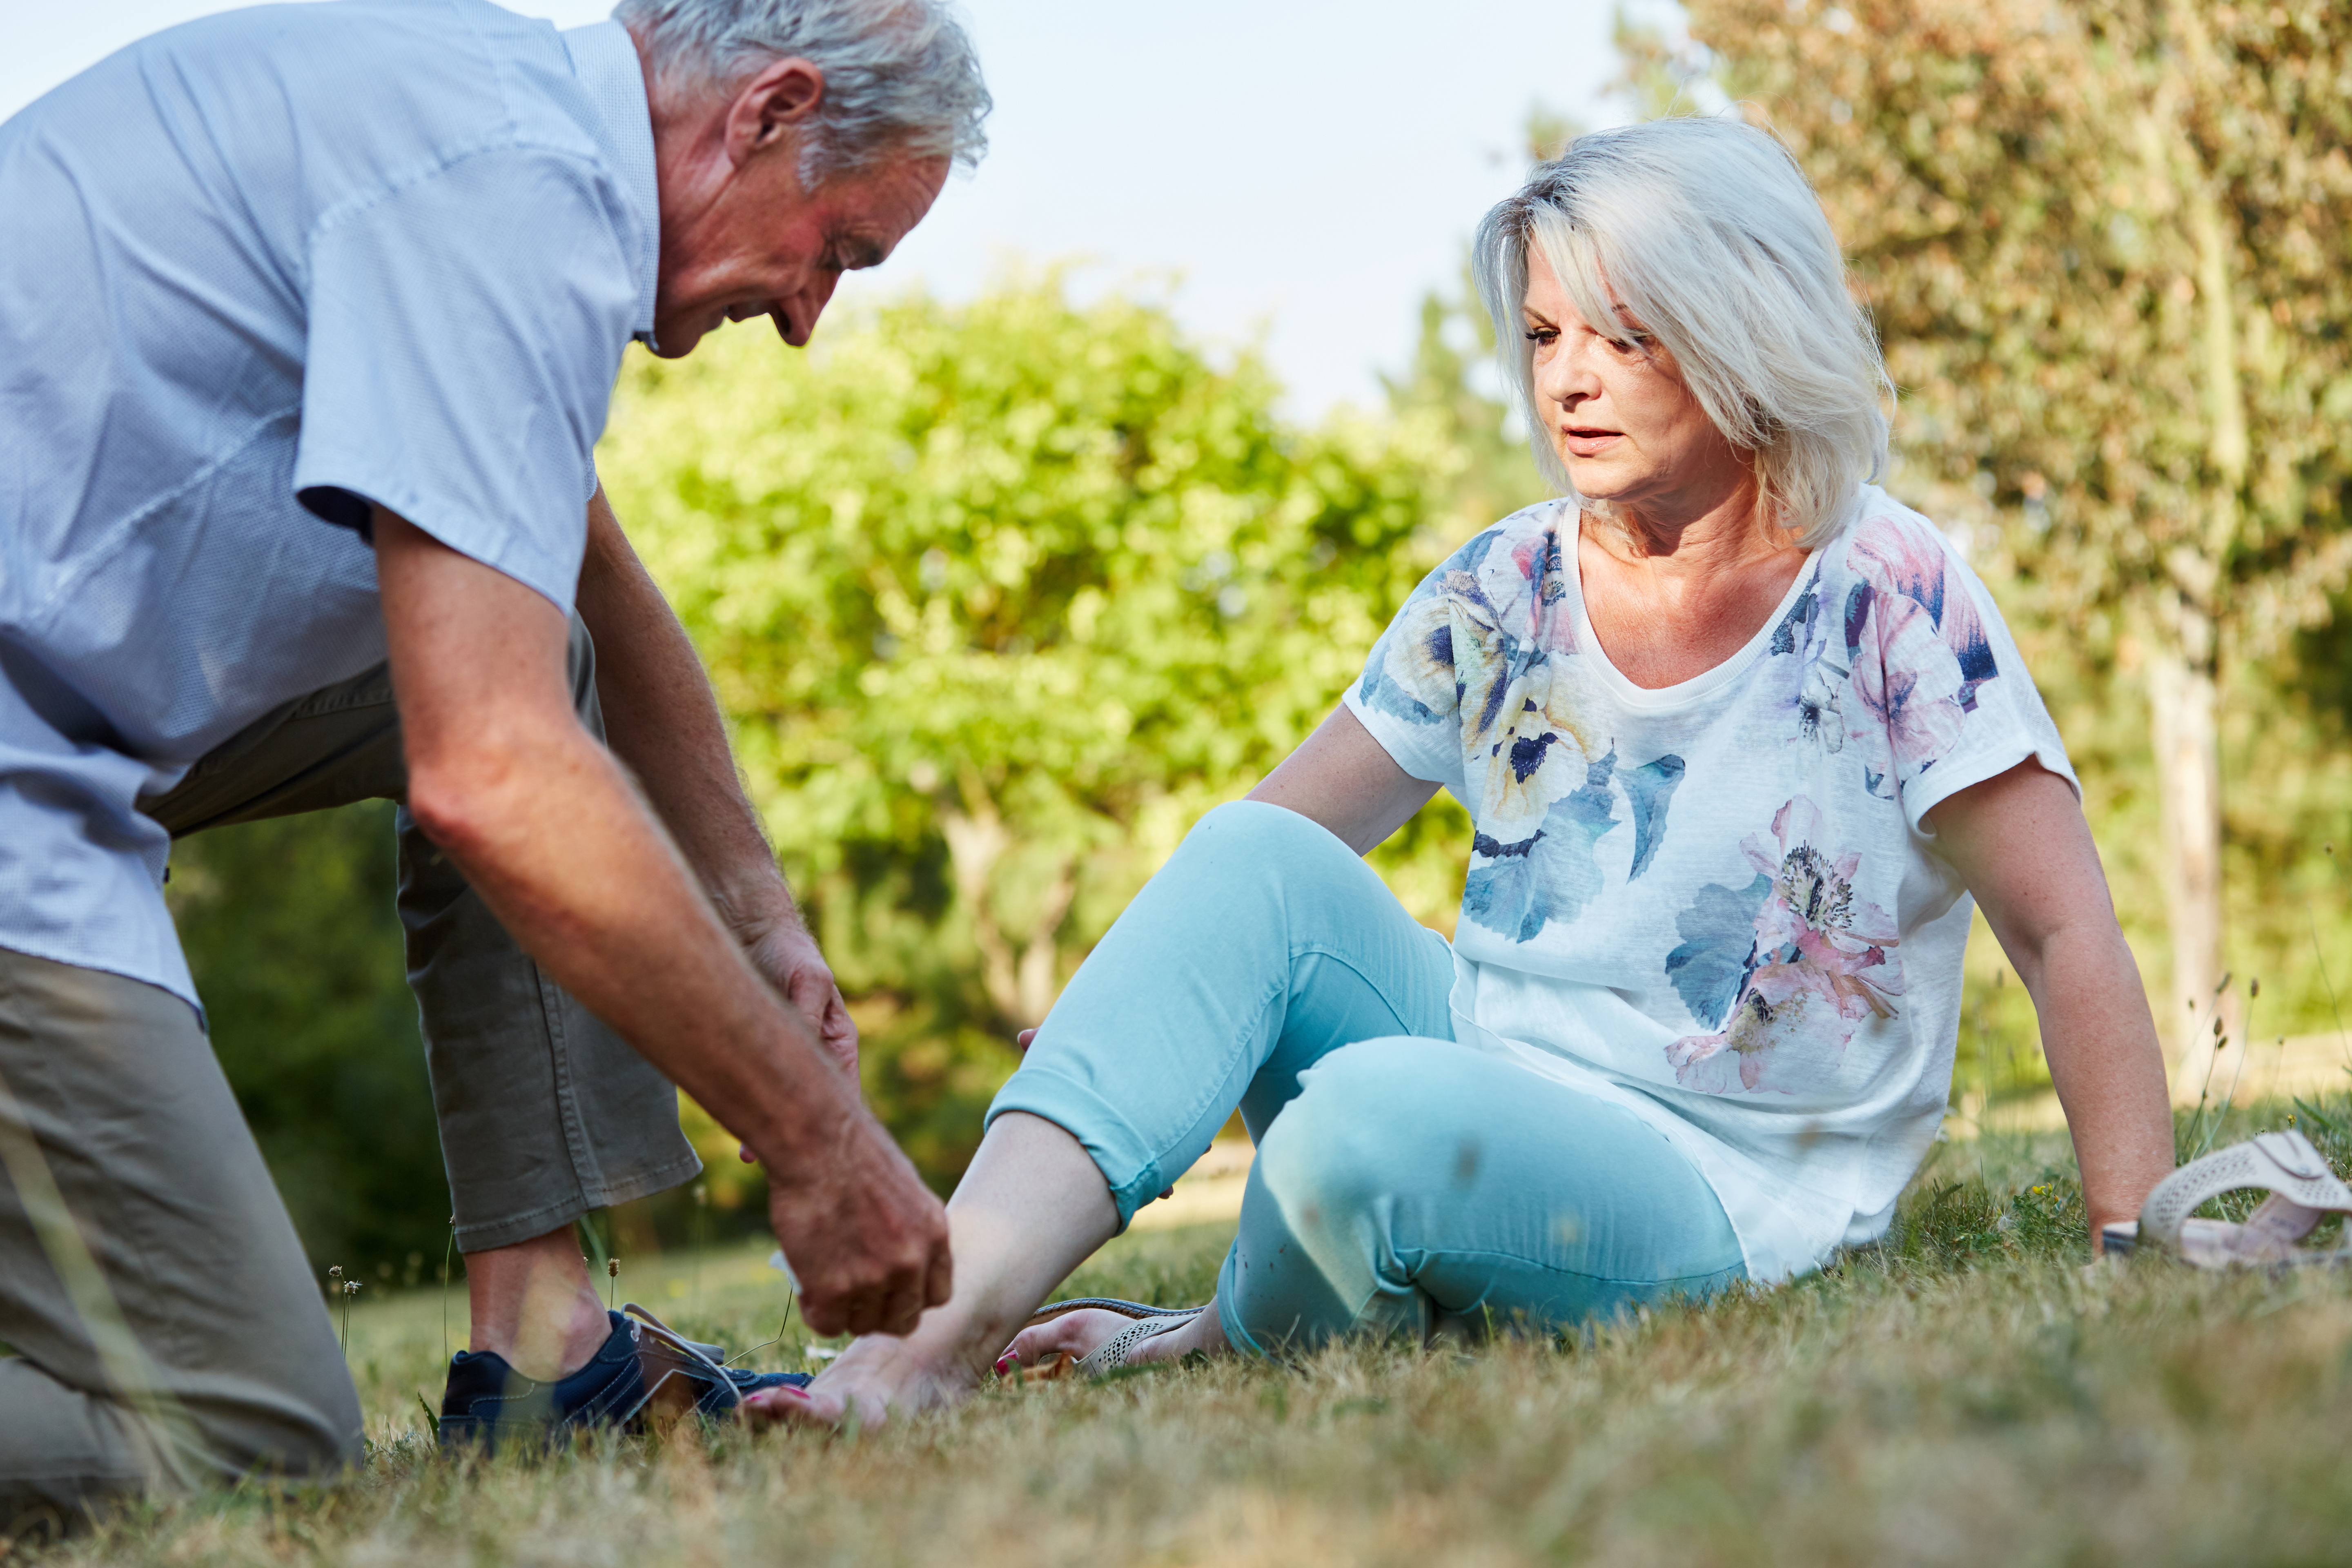 Seniors: 4 tips to keep your feet healthy